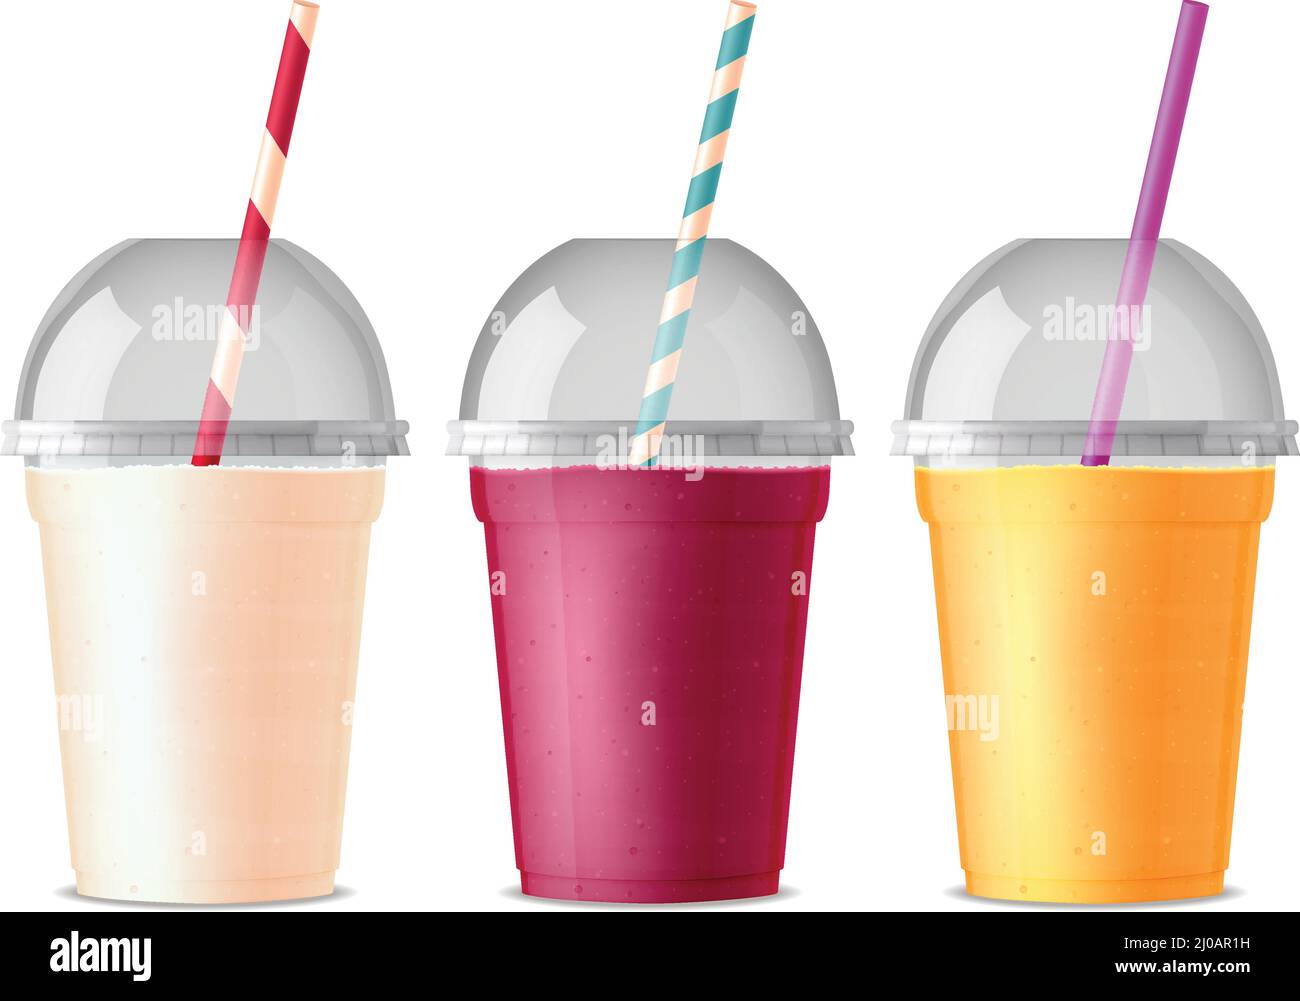 https://c8.alamy.com/comp/2J0AR1H/three-colored-takeout-fast-food-plastic-glasses-for-drink-juice-cola-tea-or-smoothie-with-pipe-and-transparent-cover-isolated-vector-illustration-2J0AR1H.jpg